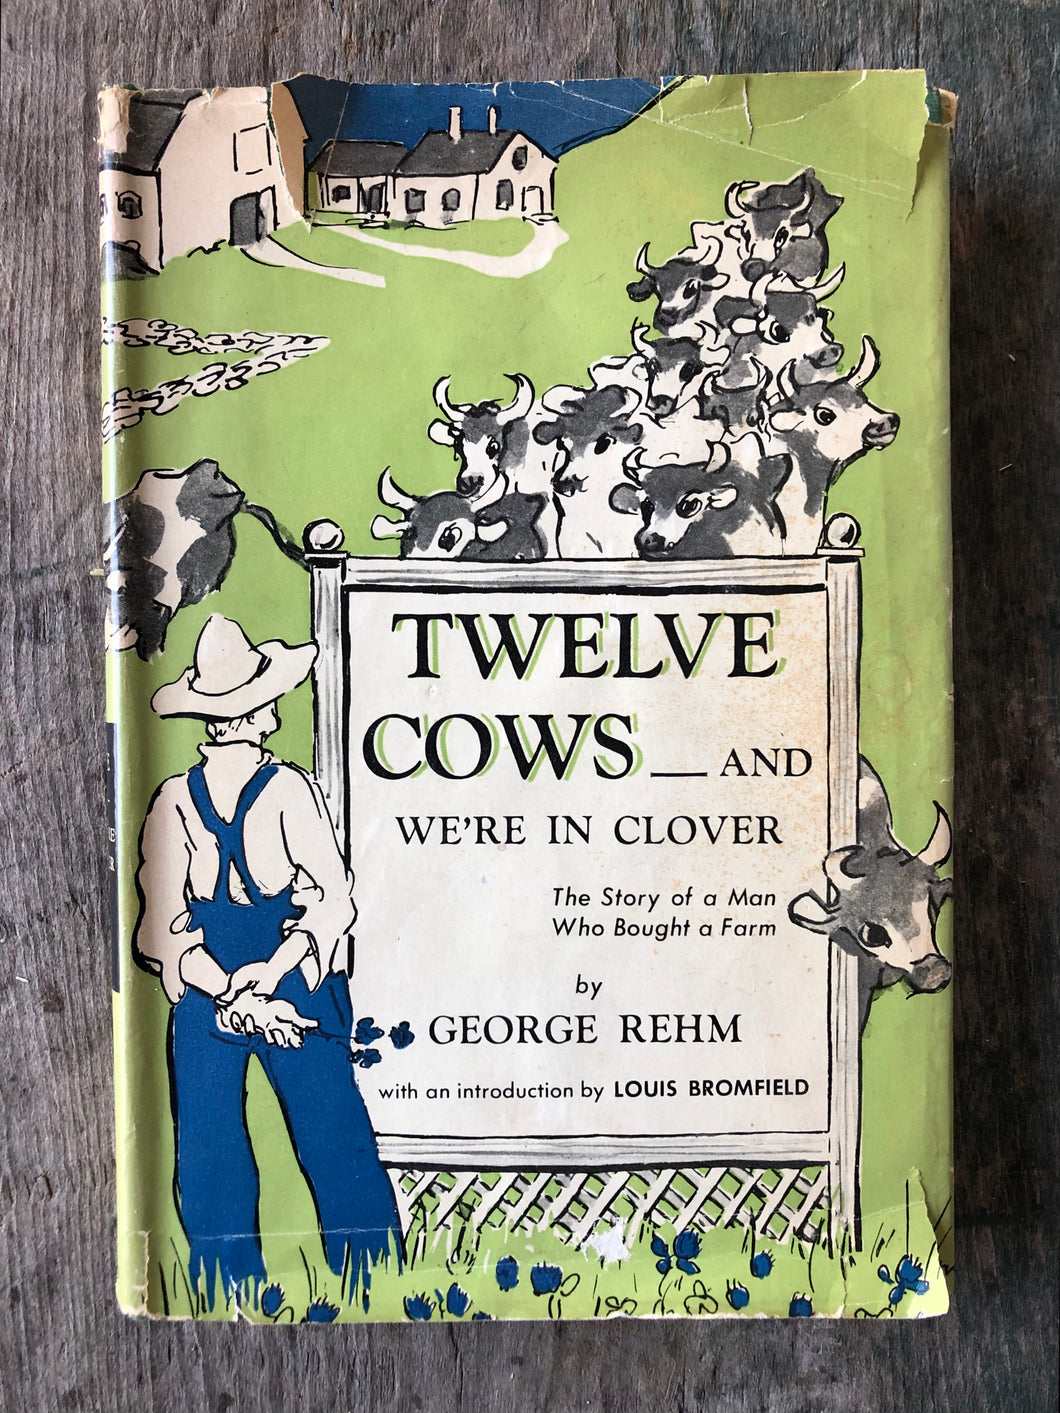 Twelve Cows— And We're in Clover: The Story of a Man Who Bought a Farm by George Rehm